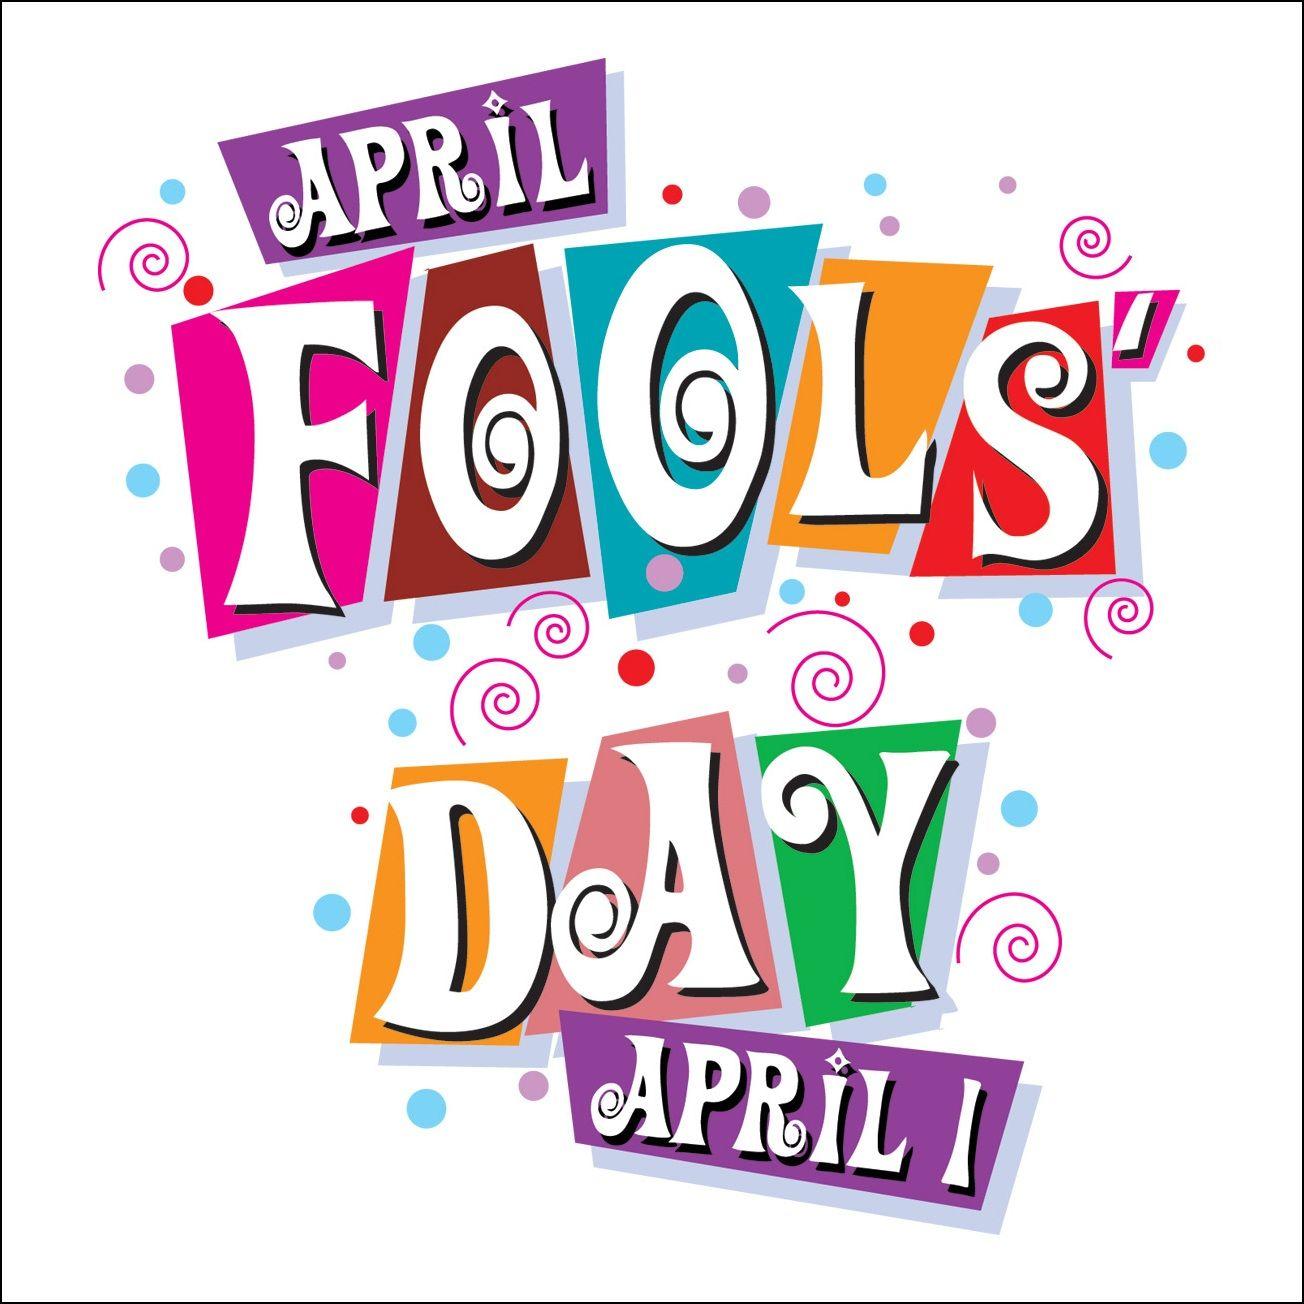 April fool sms, Messages, prank ideas, quotes and wallpaper